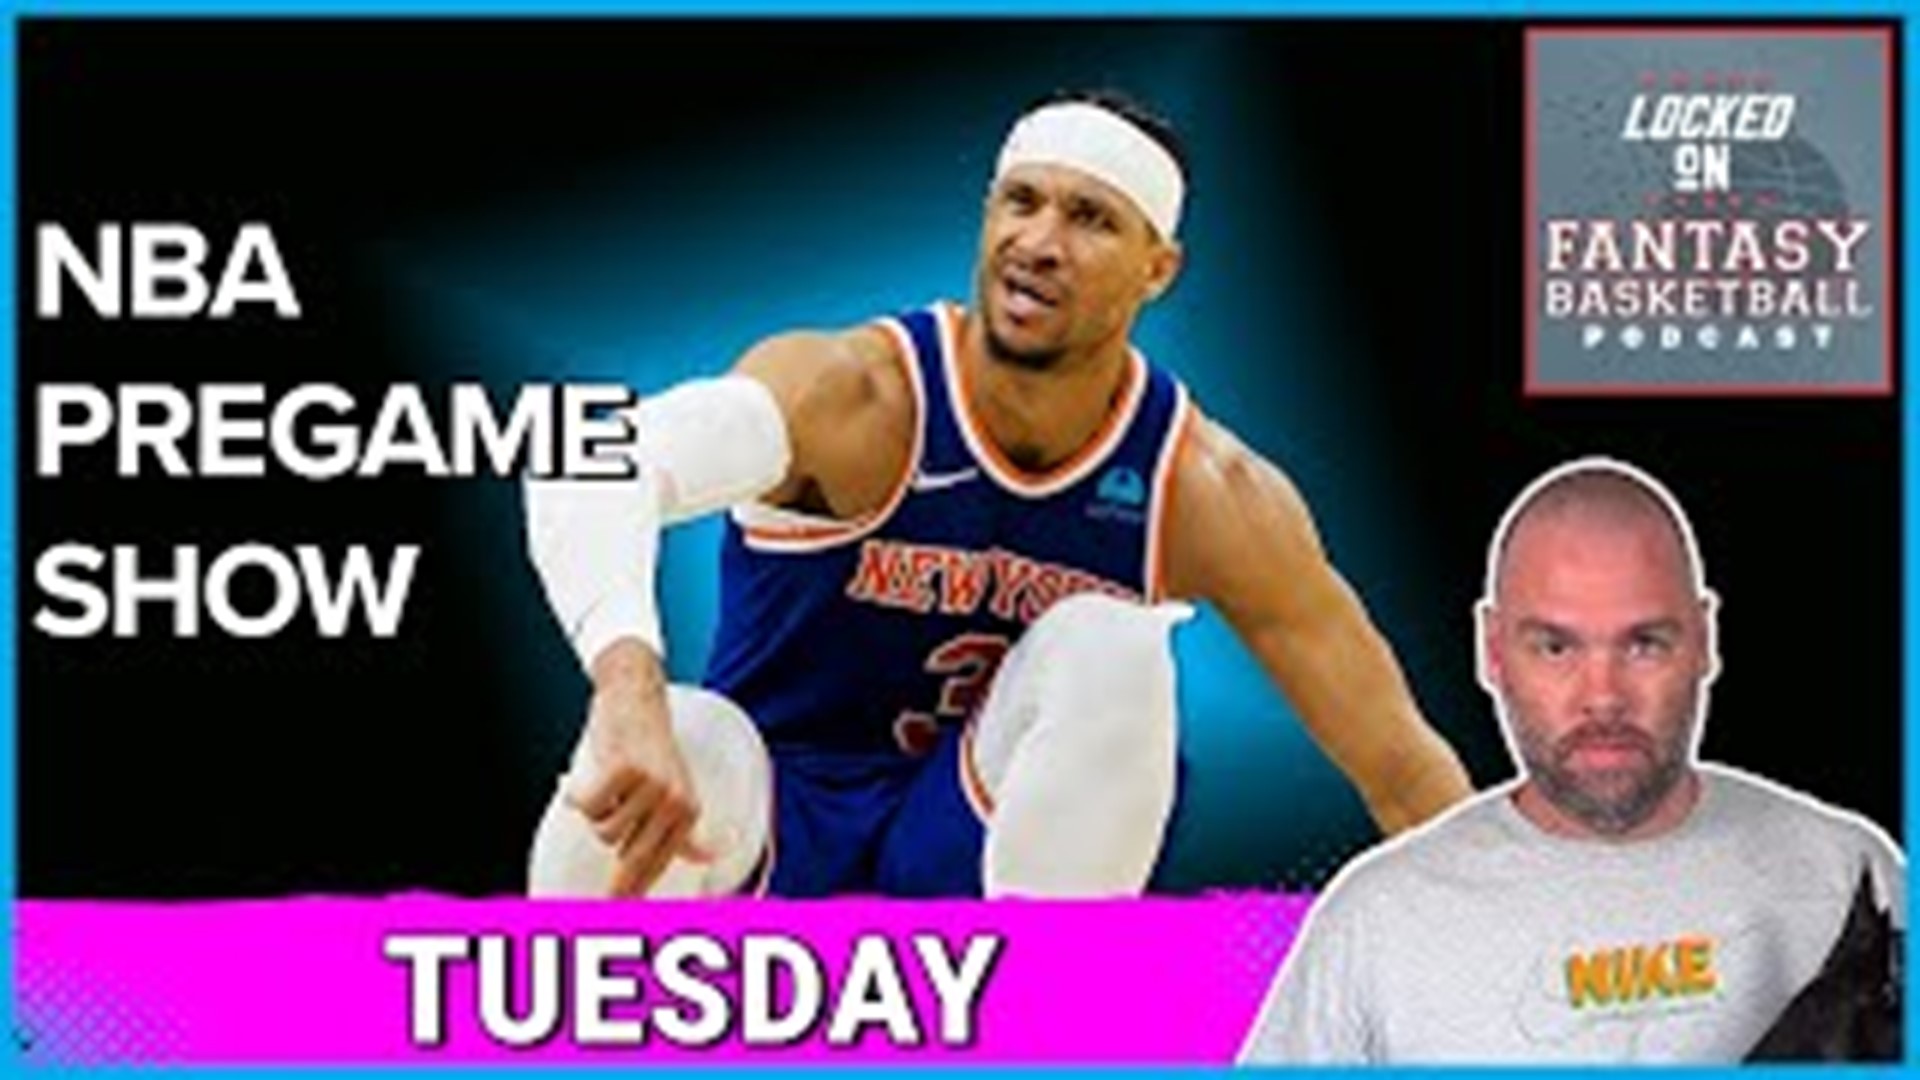 Welcome to the live NBA pregame show, hosted by Josh Lloyd, a leading voice in fantasy basketball analysis. We have 9 games scheduled for Tuesday!